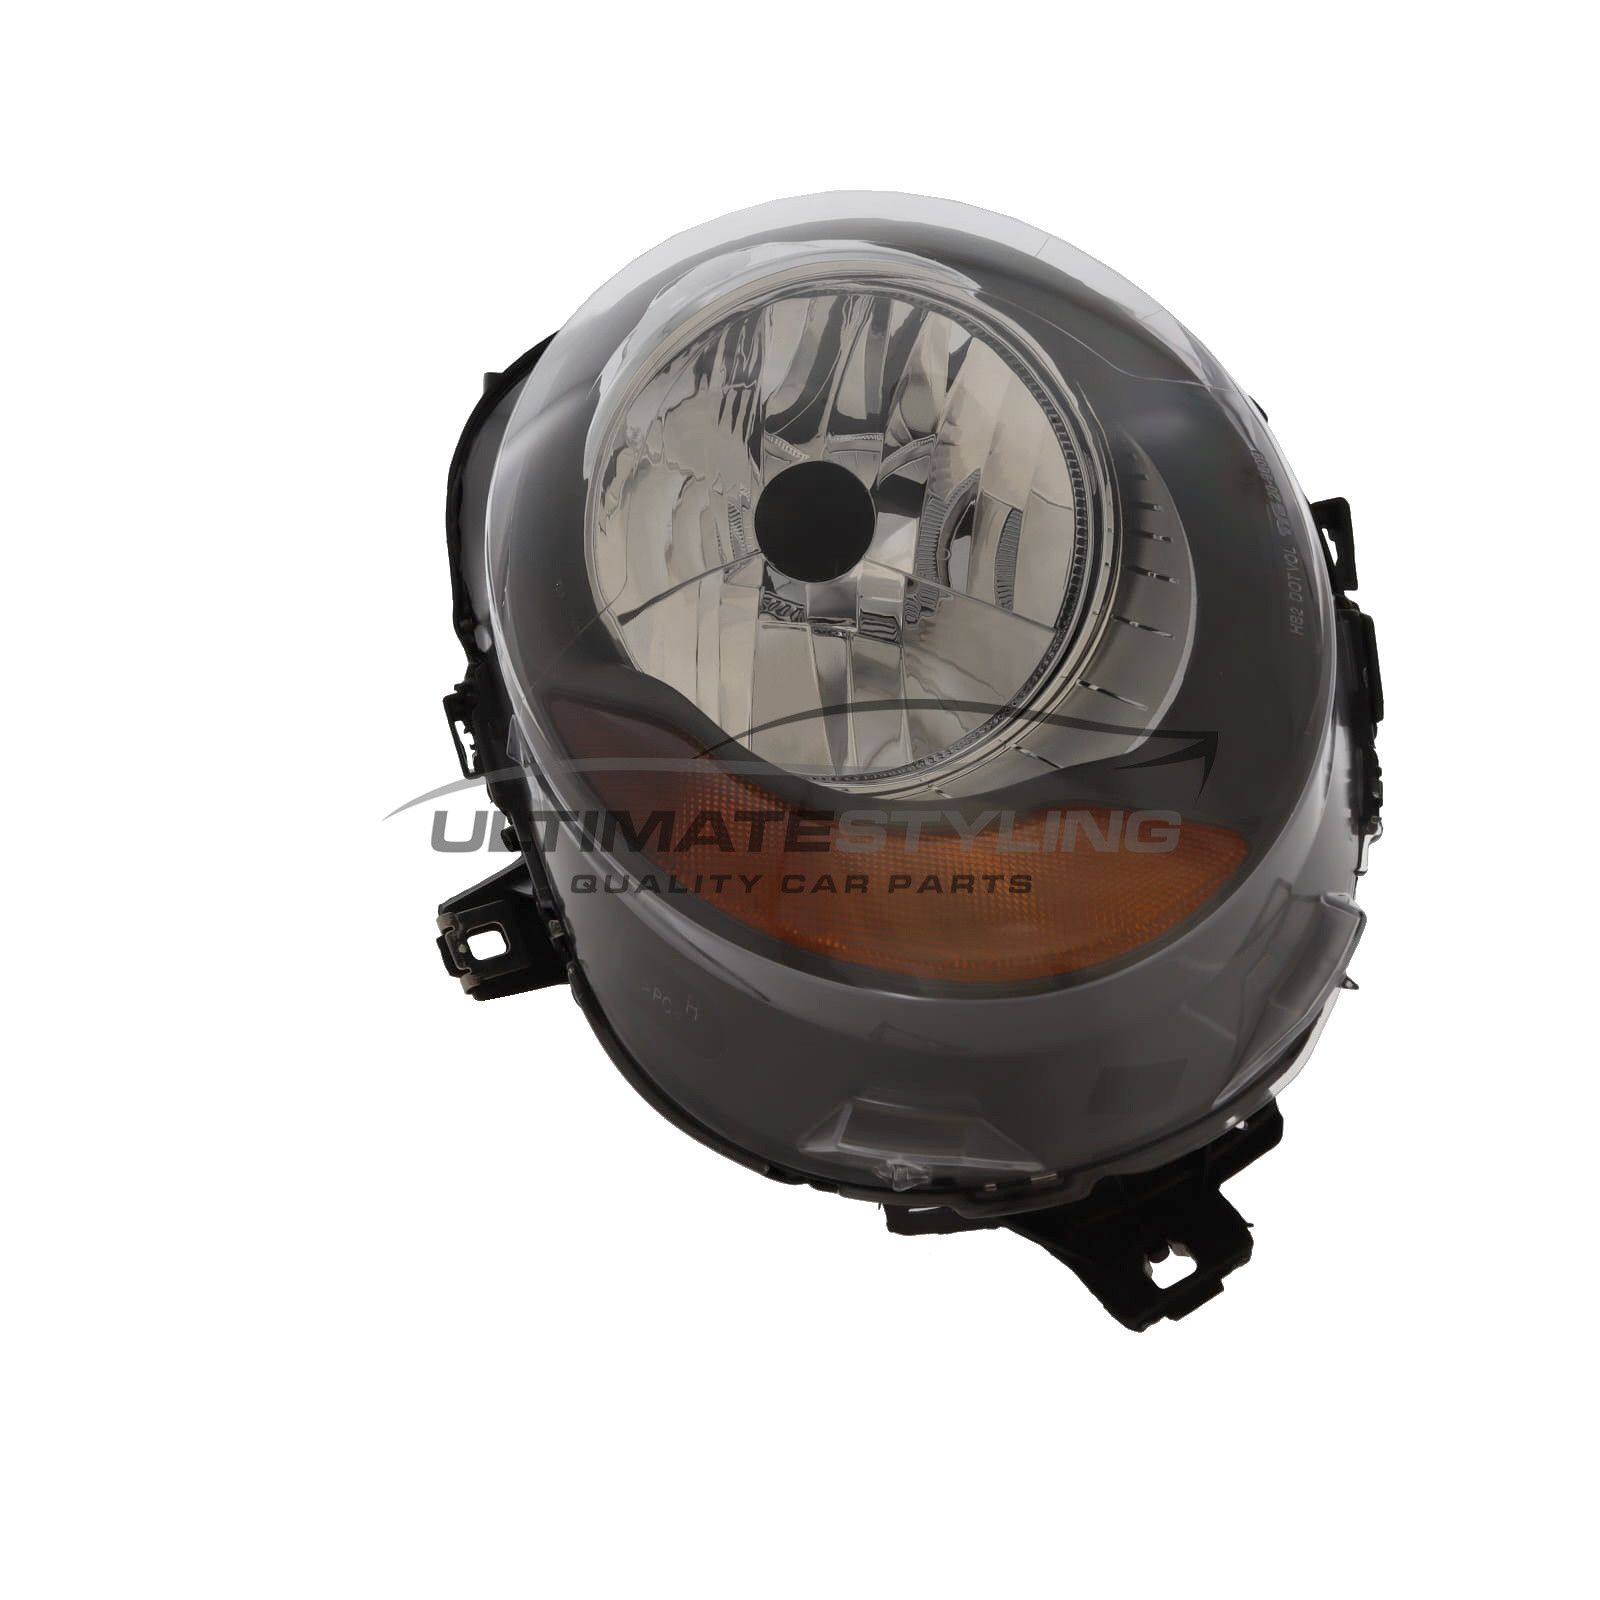 Mini 2014-2018 Halogen, Electric With Motor, Headlight / Headlamp with Black Surround Including Amber Indicator Drivers Side (RH)